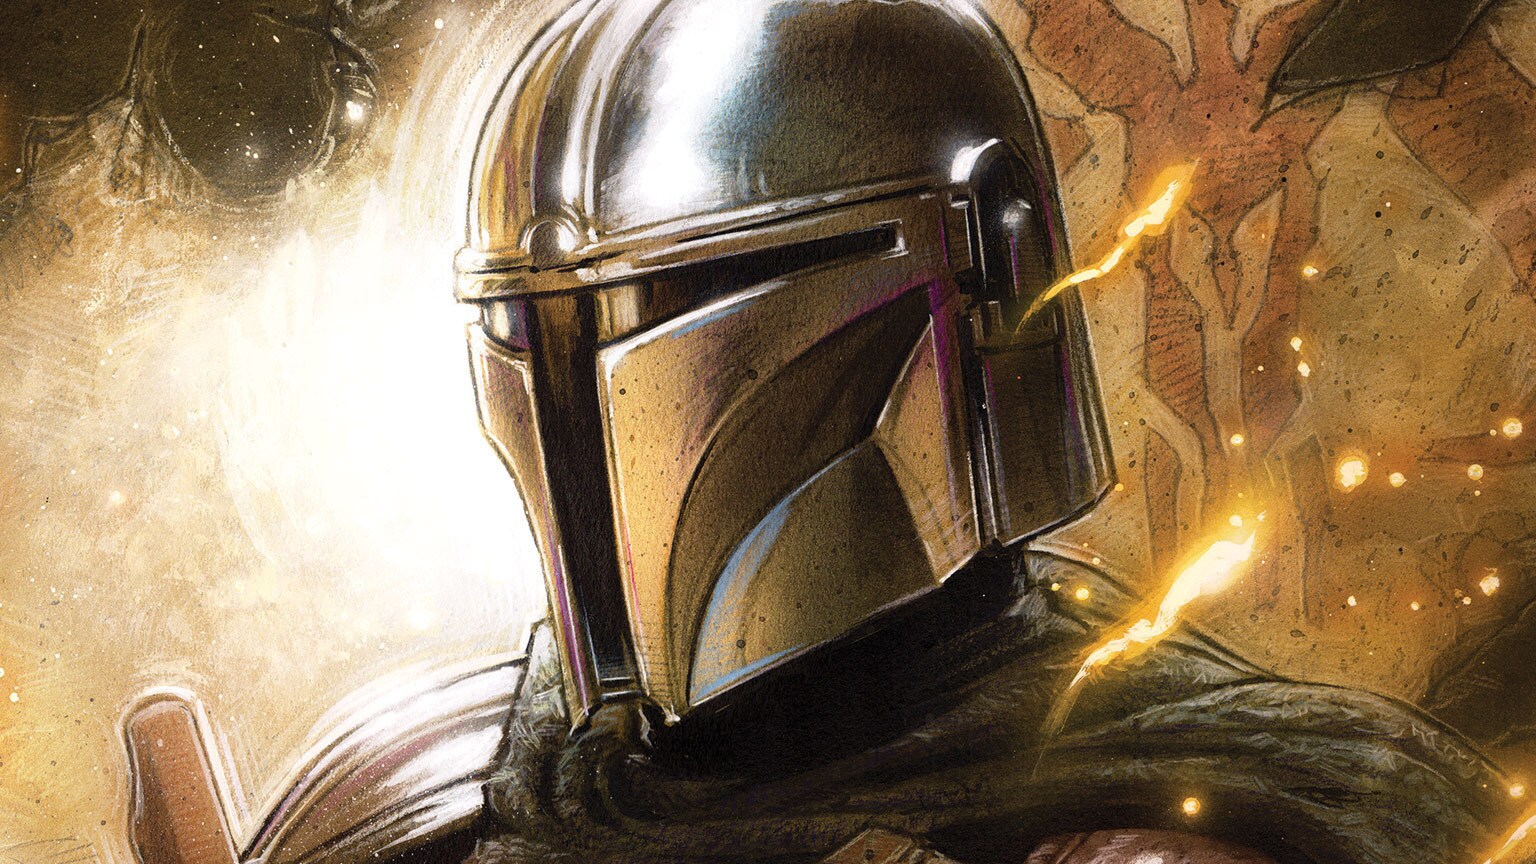 The Hunt is On in Marvel’s Star Wars: The Mandalorian #2 – Exclusive Preview